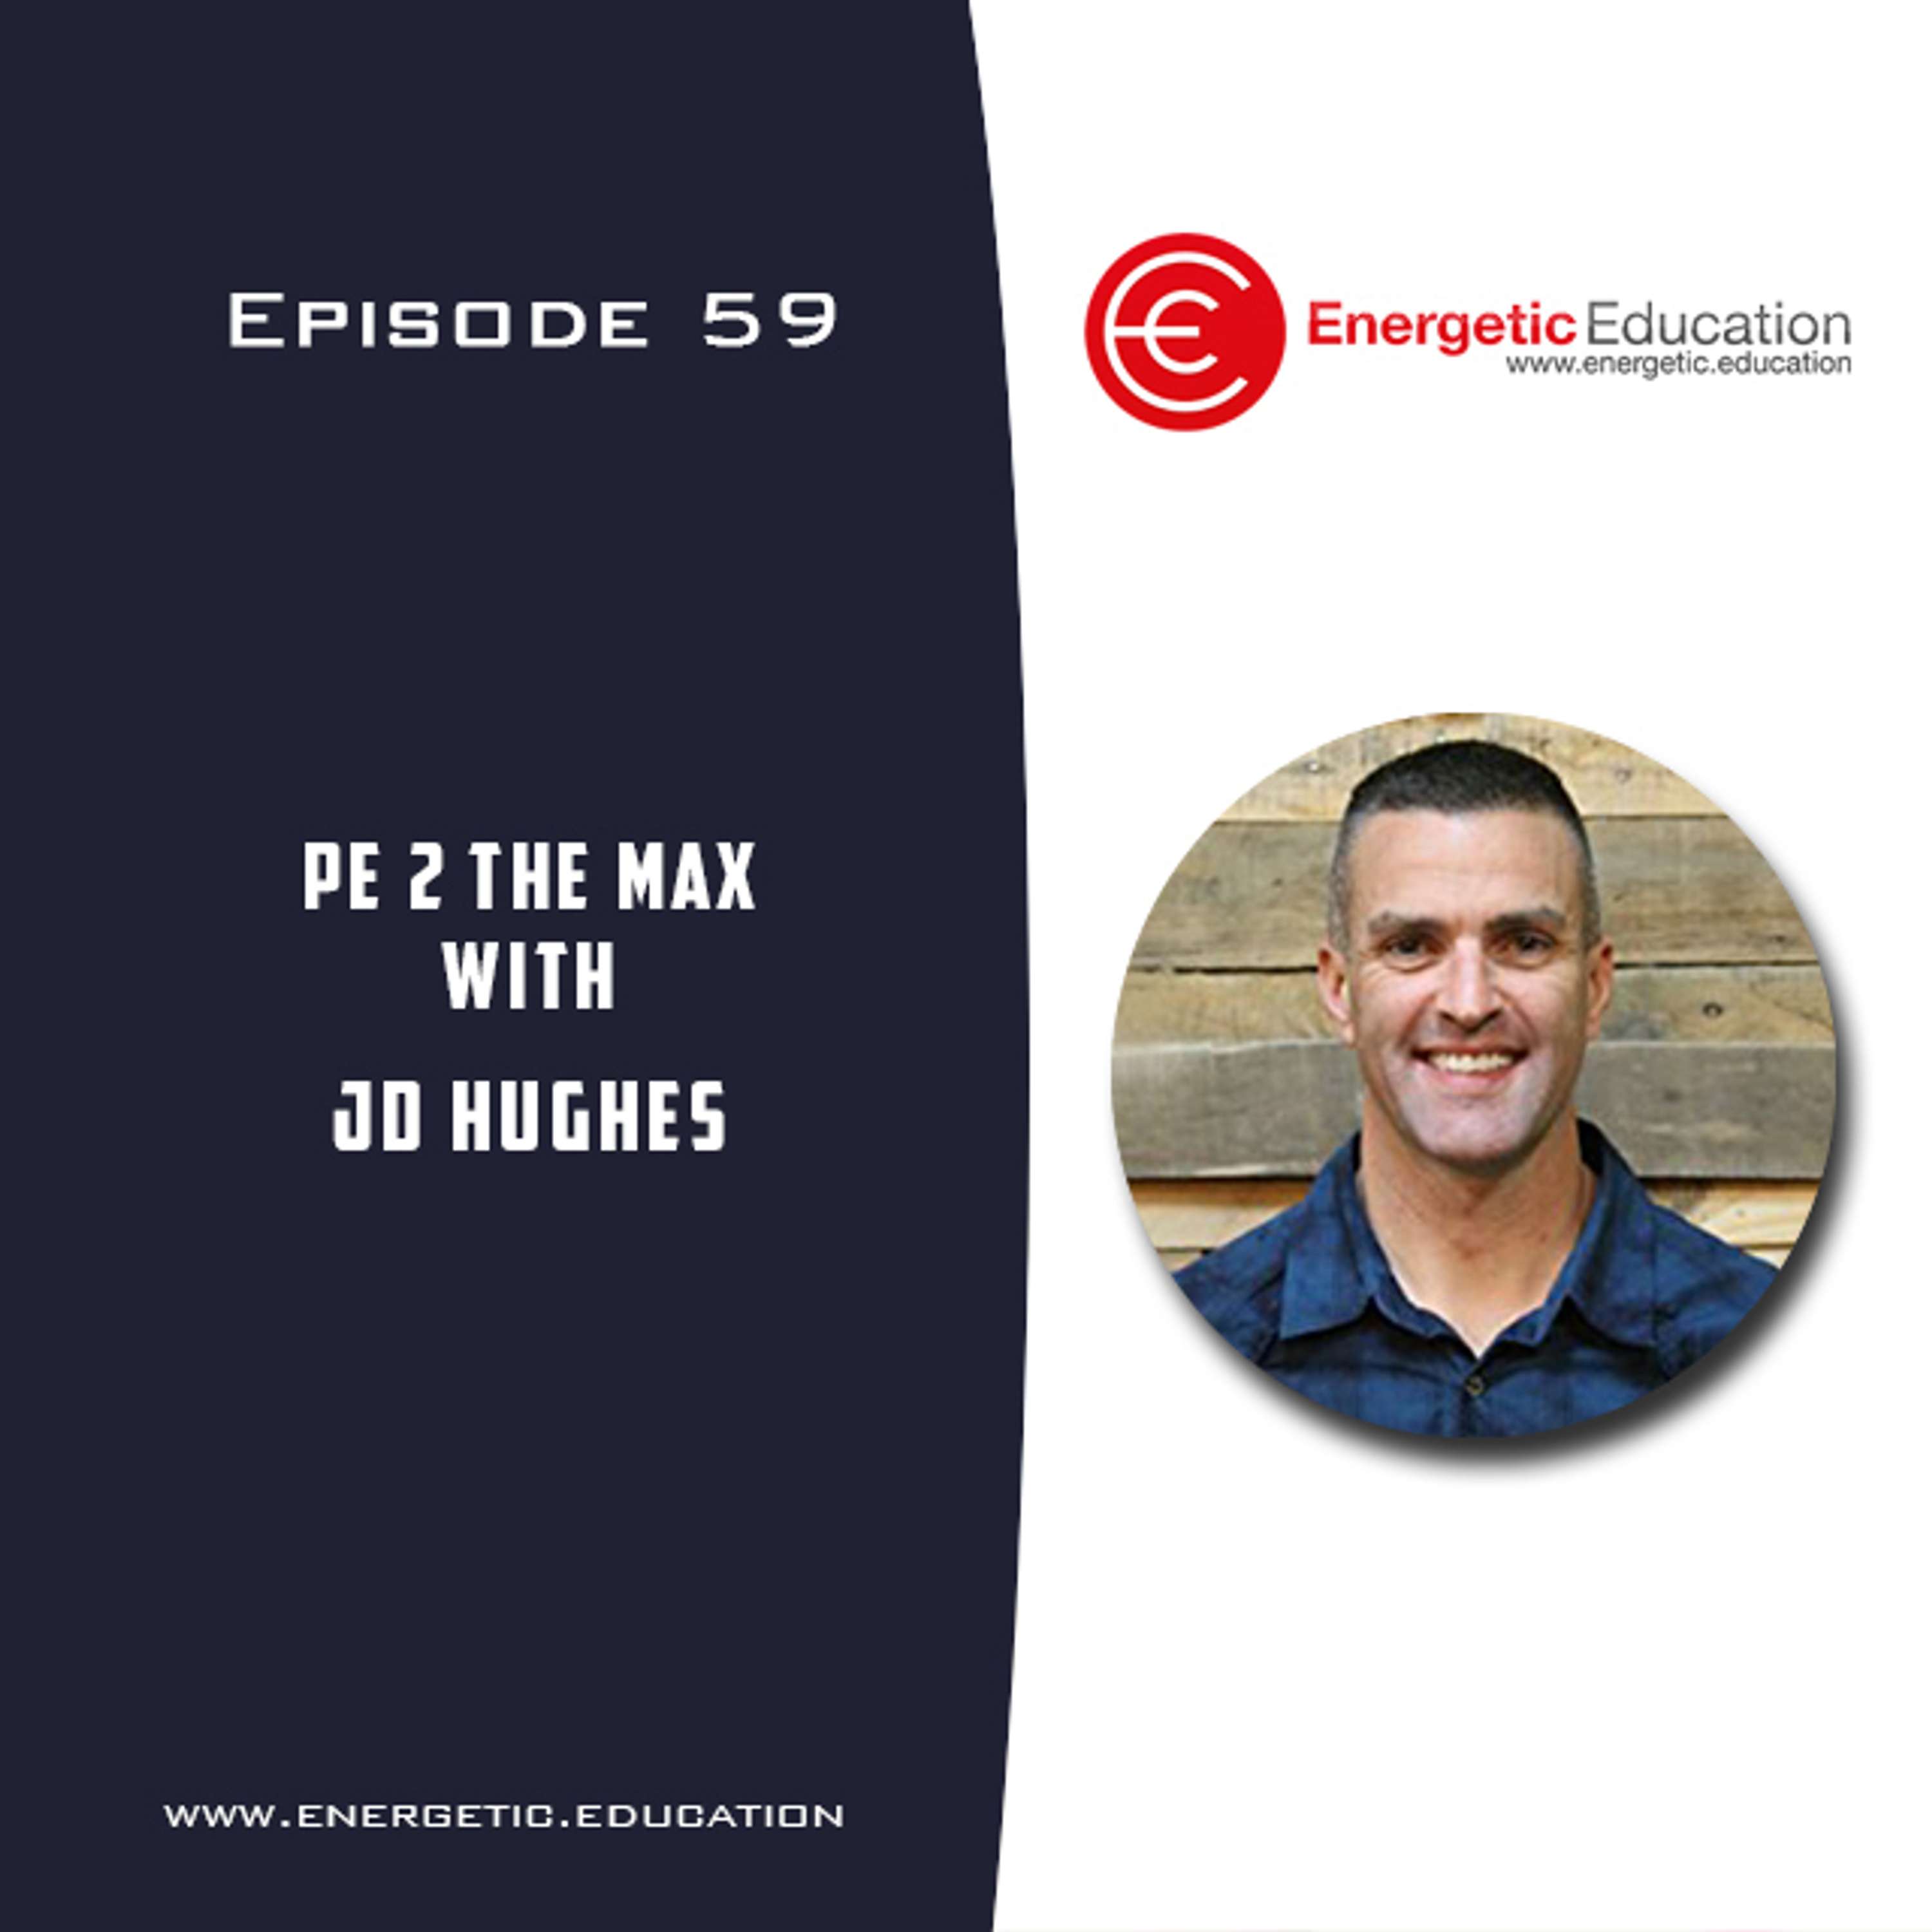 Episode 59 - PE 2 the Max with JD Hughes 